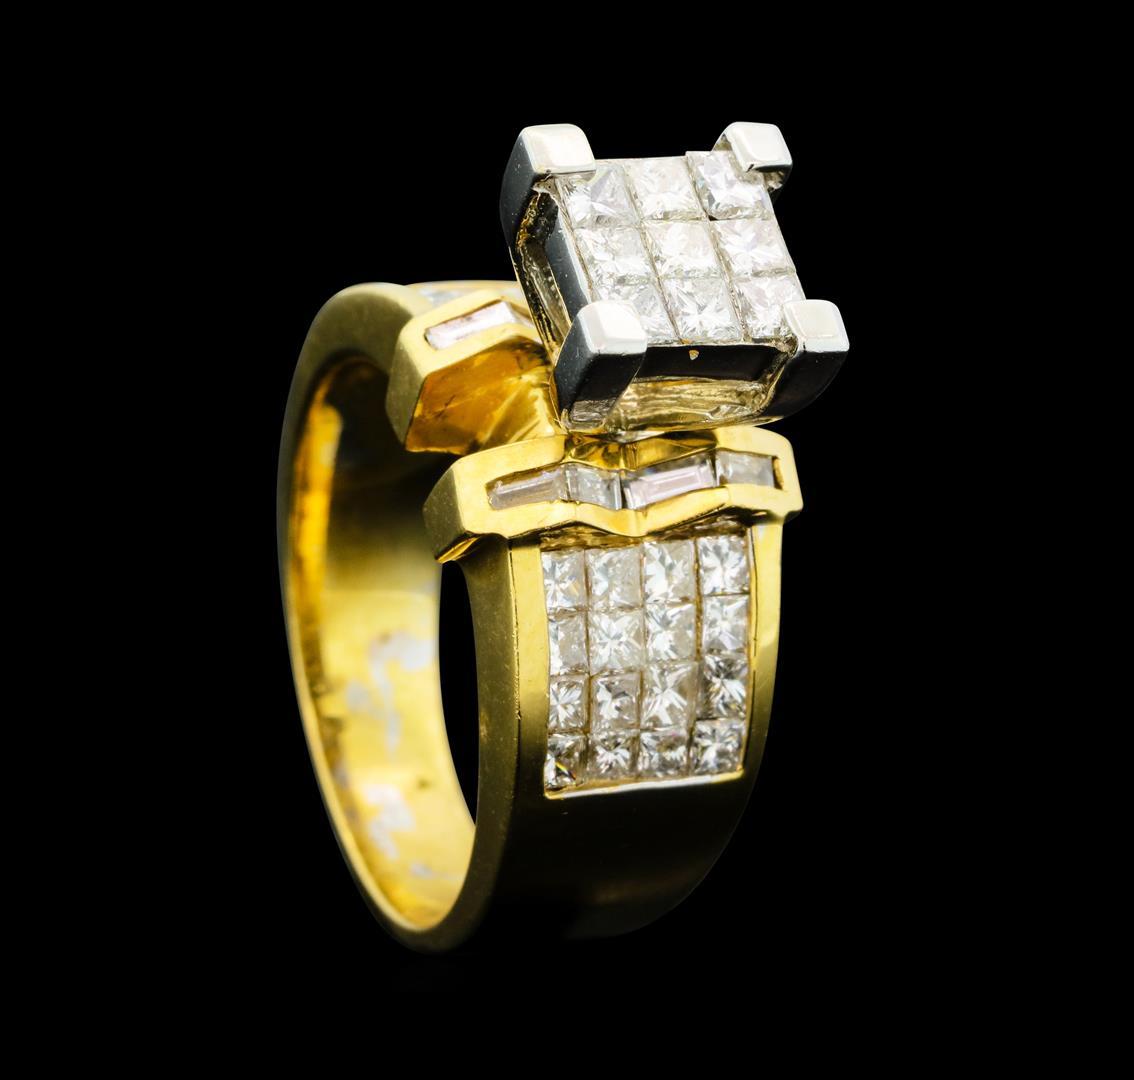 2.10 ctw Diamond Ring - 14KT Yellow And White Gold